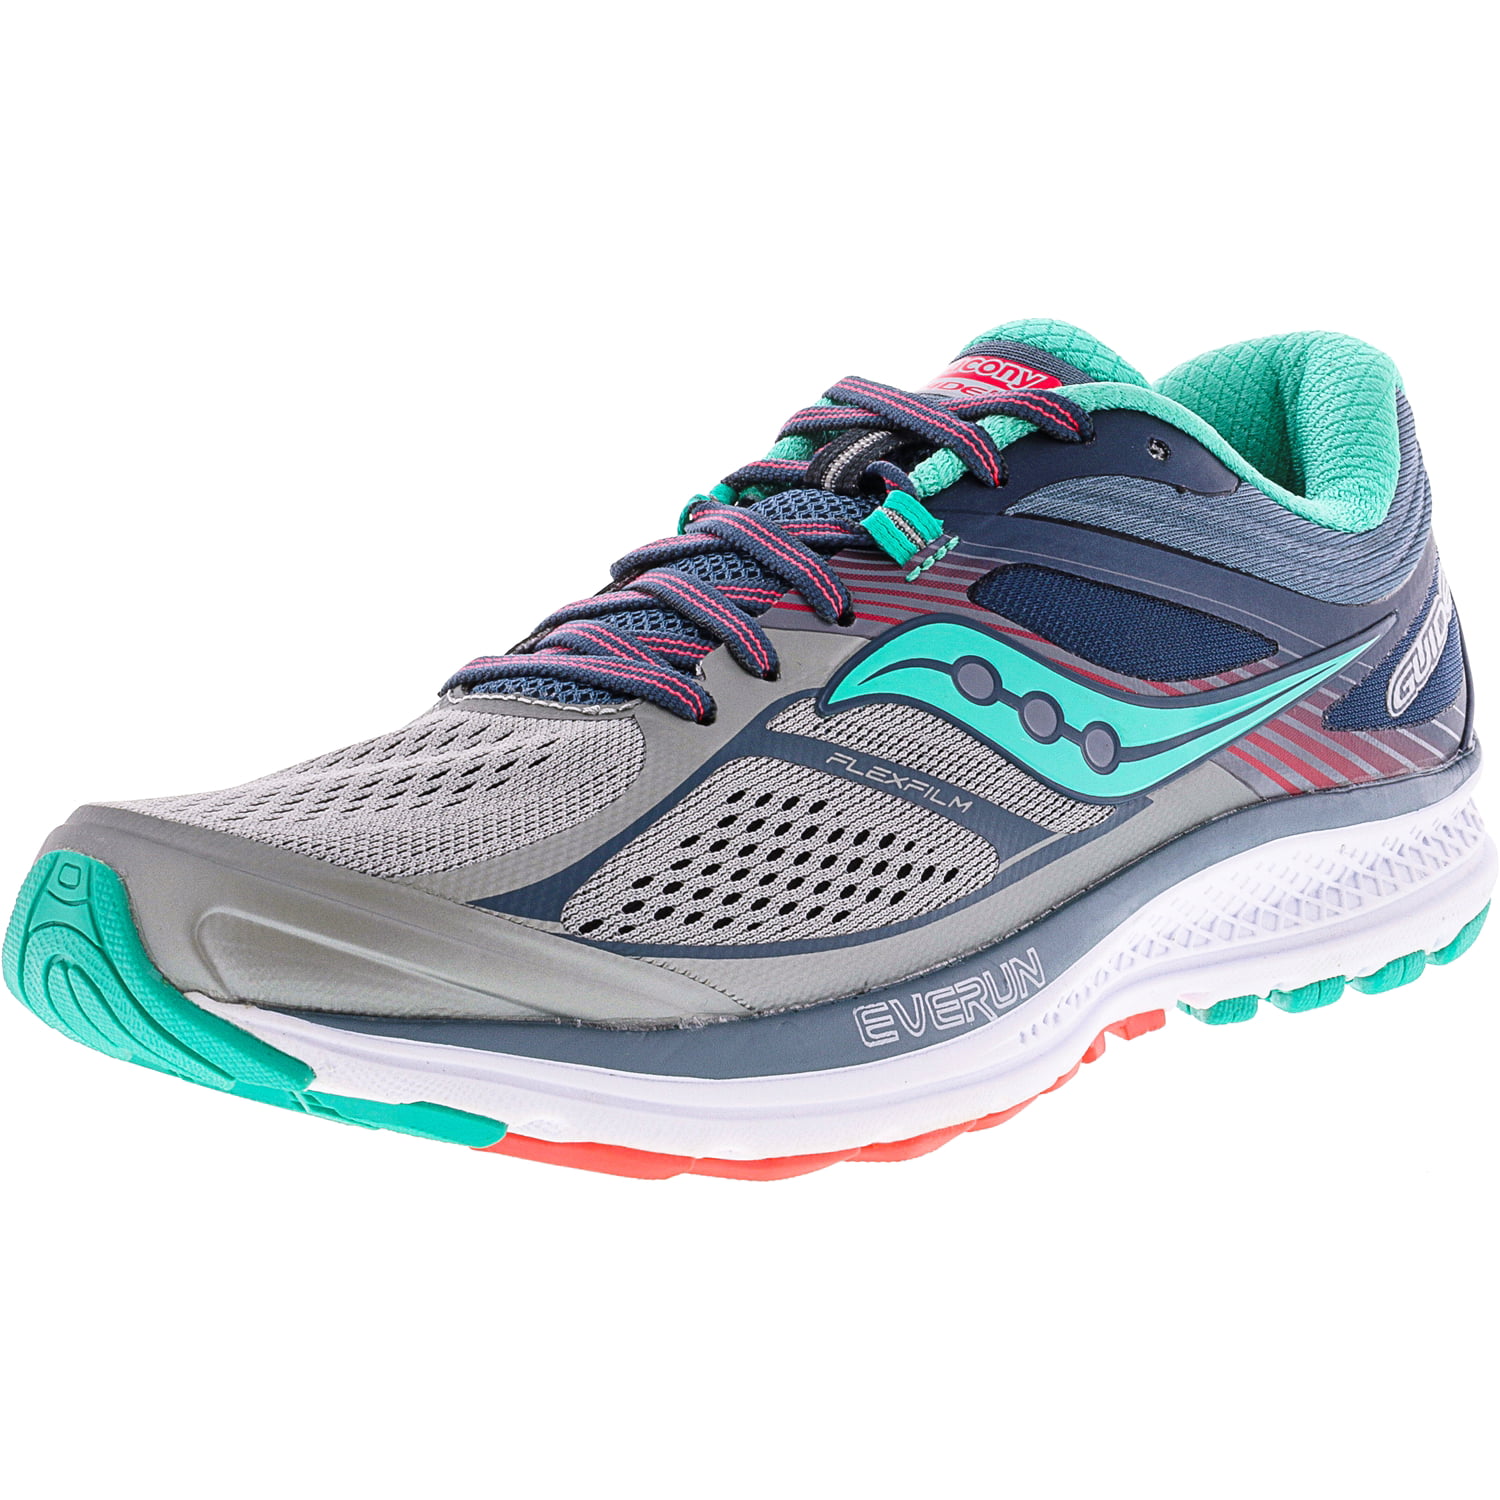 saucony guide 10 running shoes (for women)